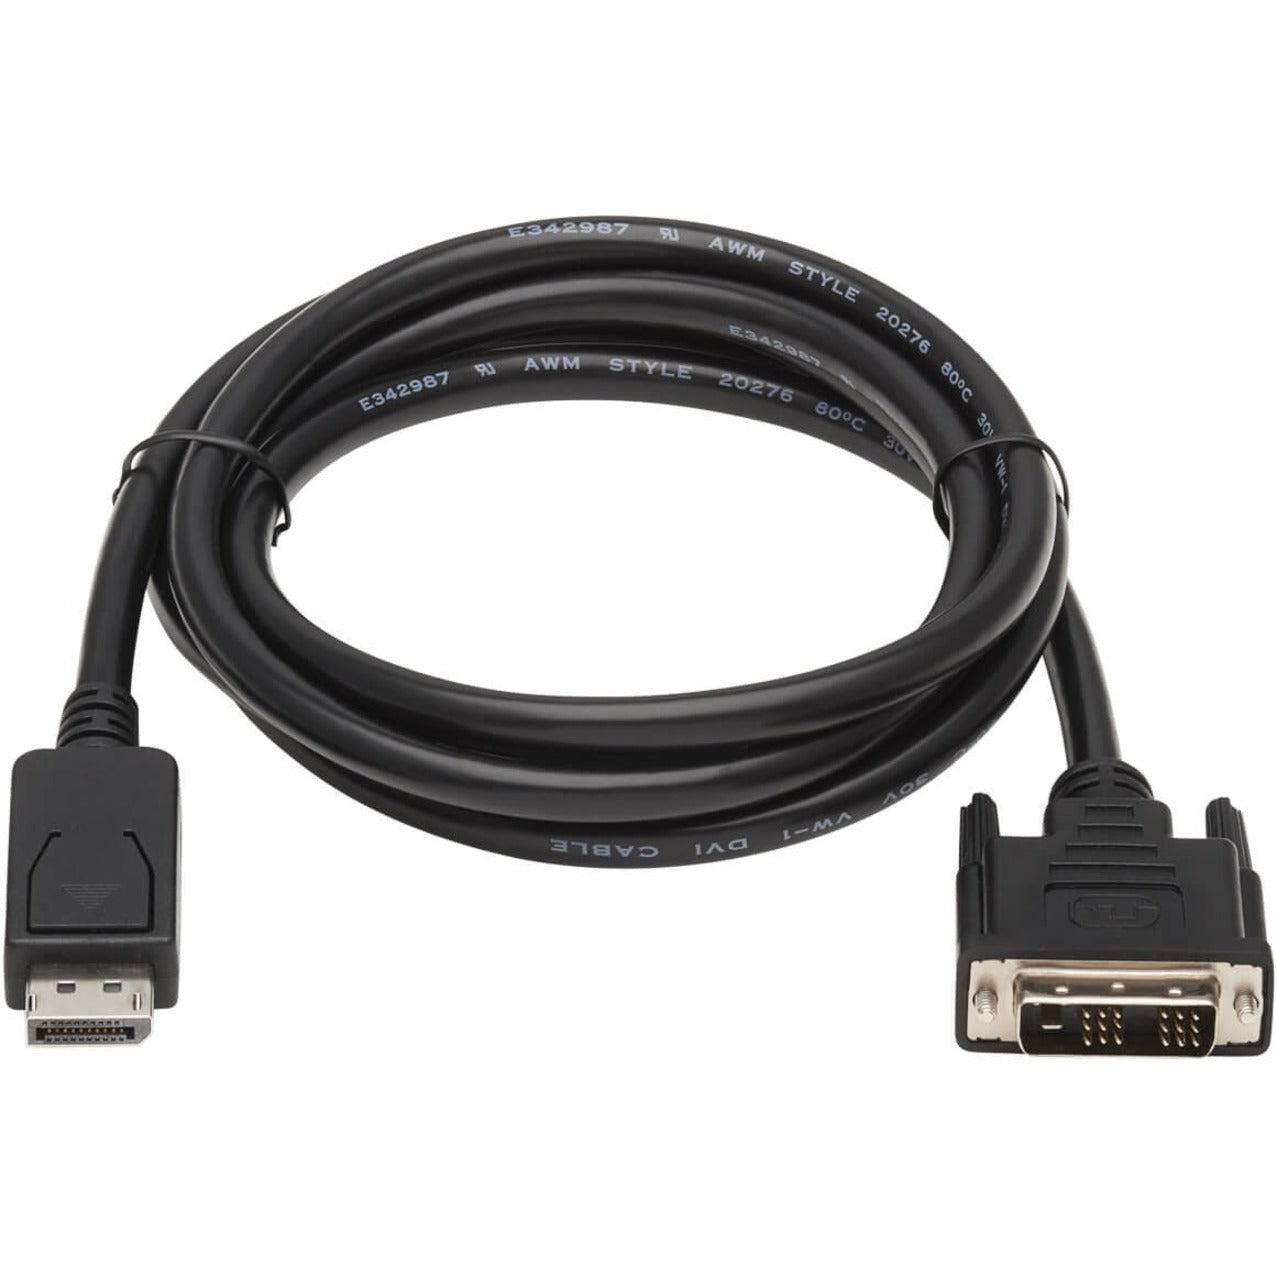 Tripp Lite P581-006 Adapter Cable, 6FT DisplayPort-Male to DVI-D-Male